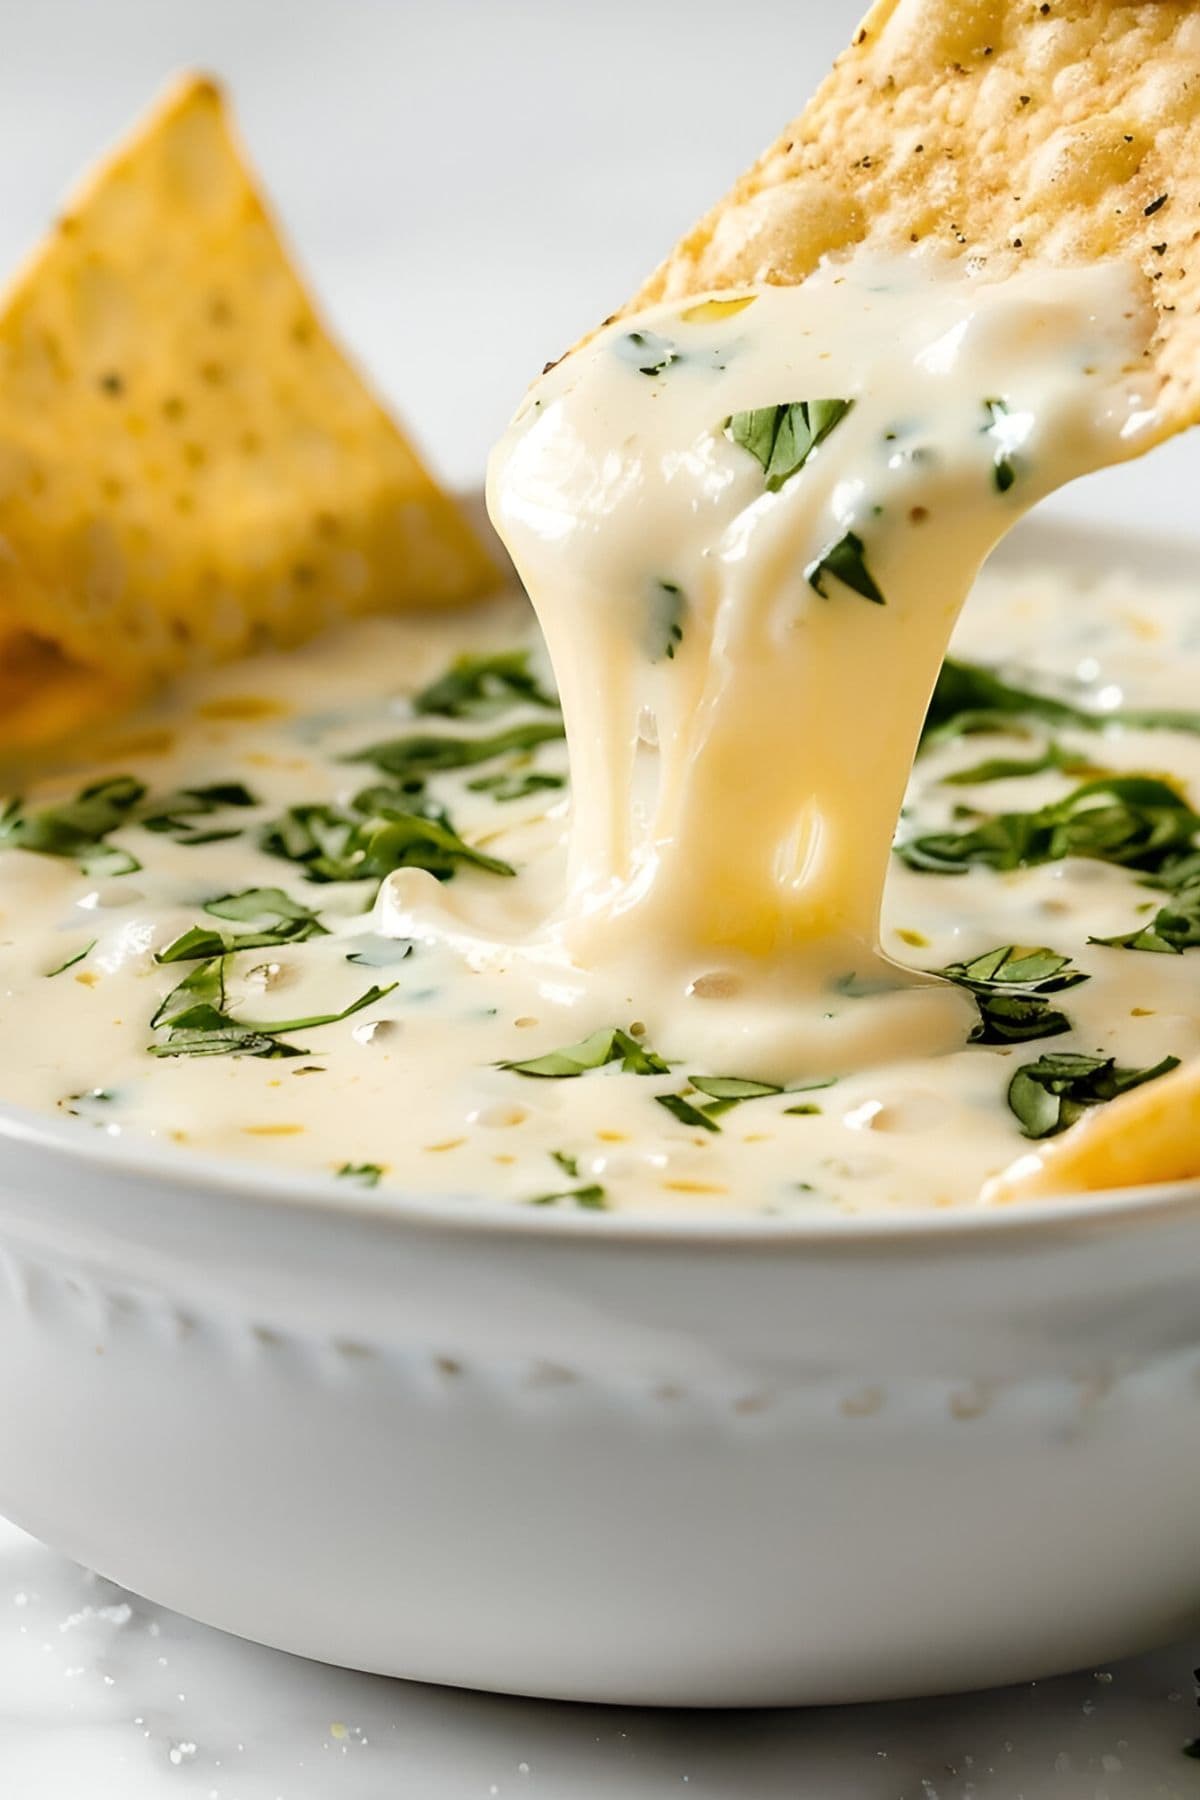 Close up of Chip Dipping Into Mexican White Queso Cheese Dip with Cilantro